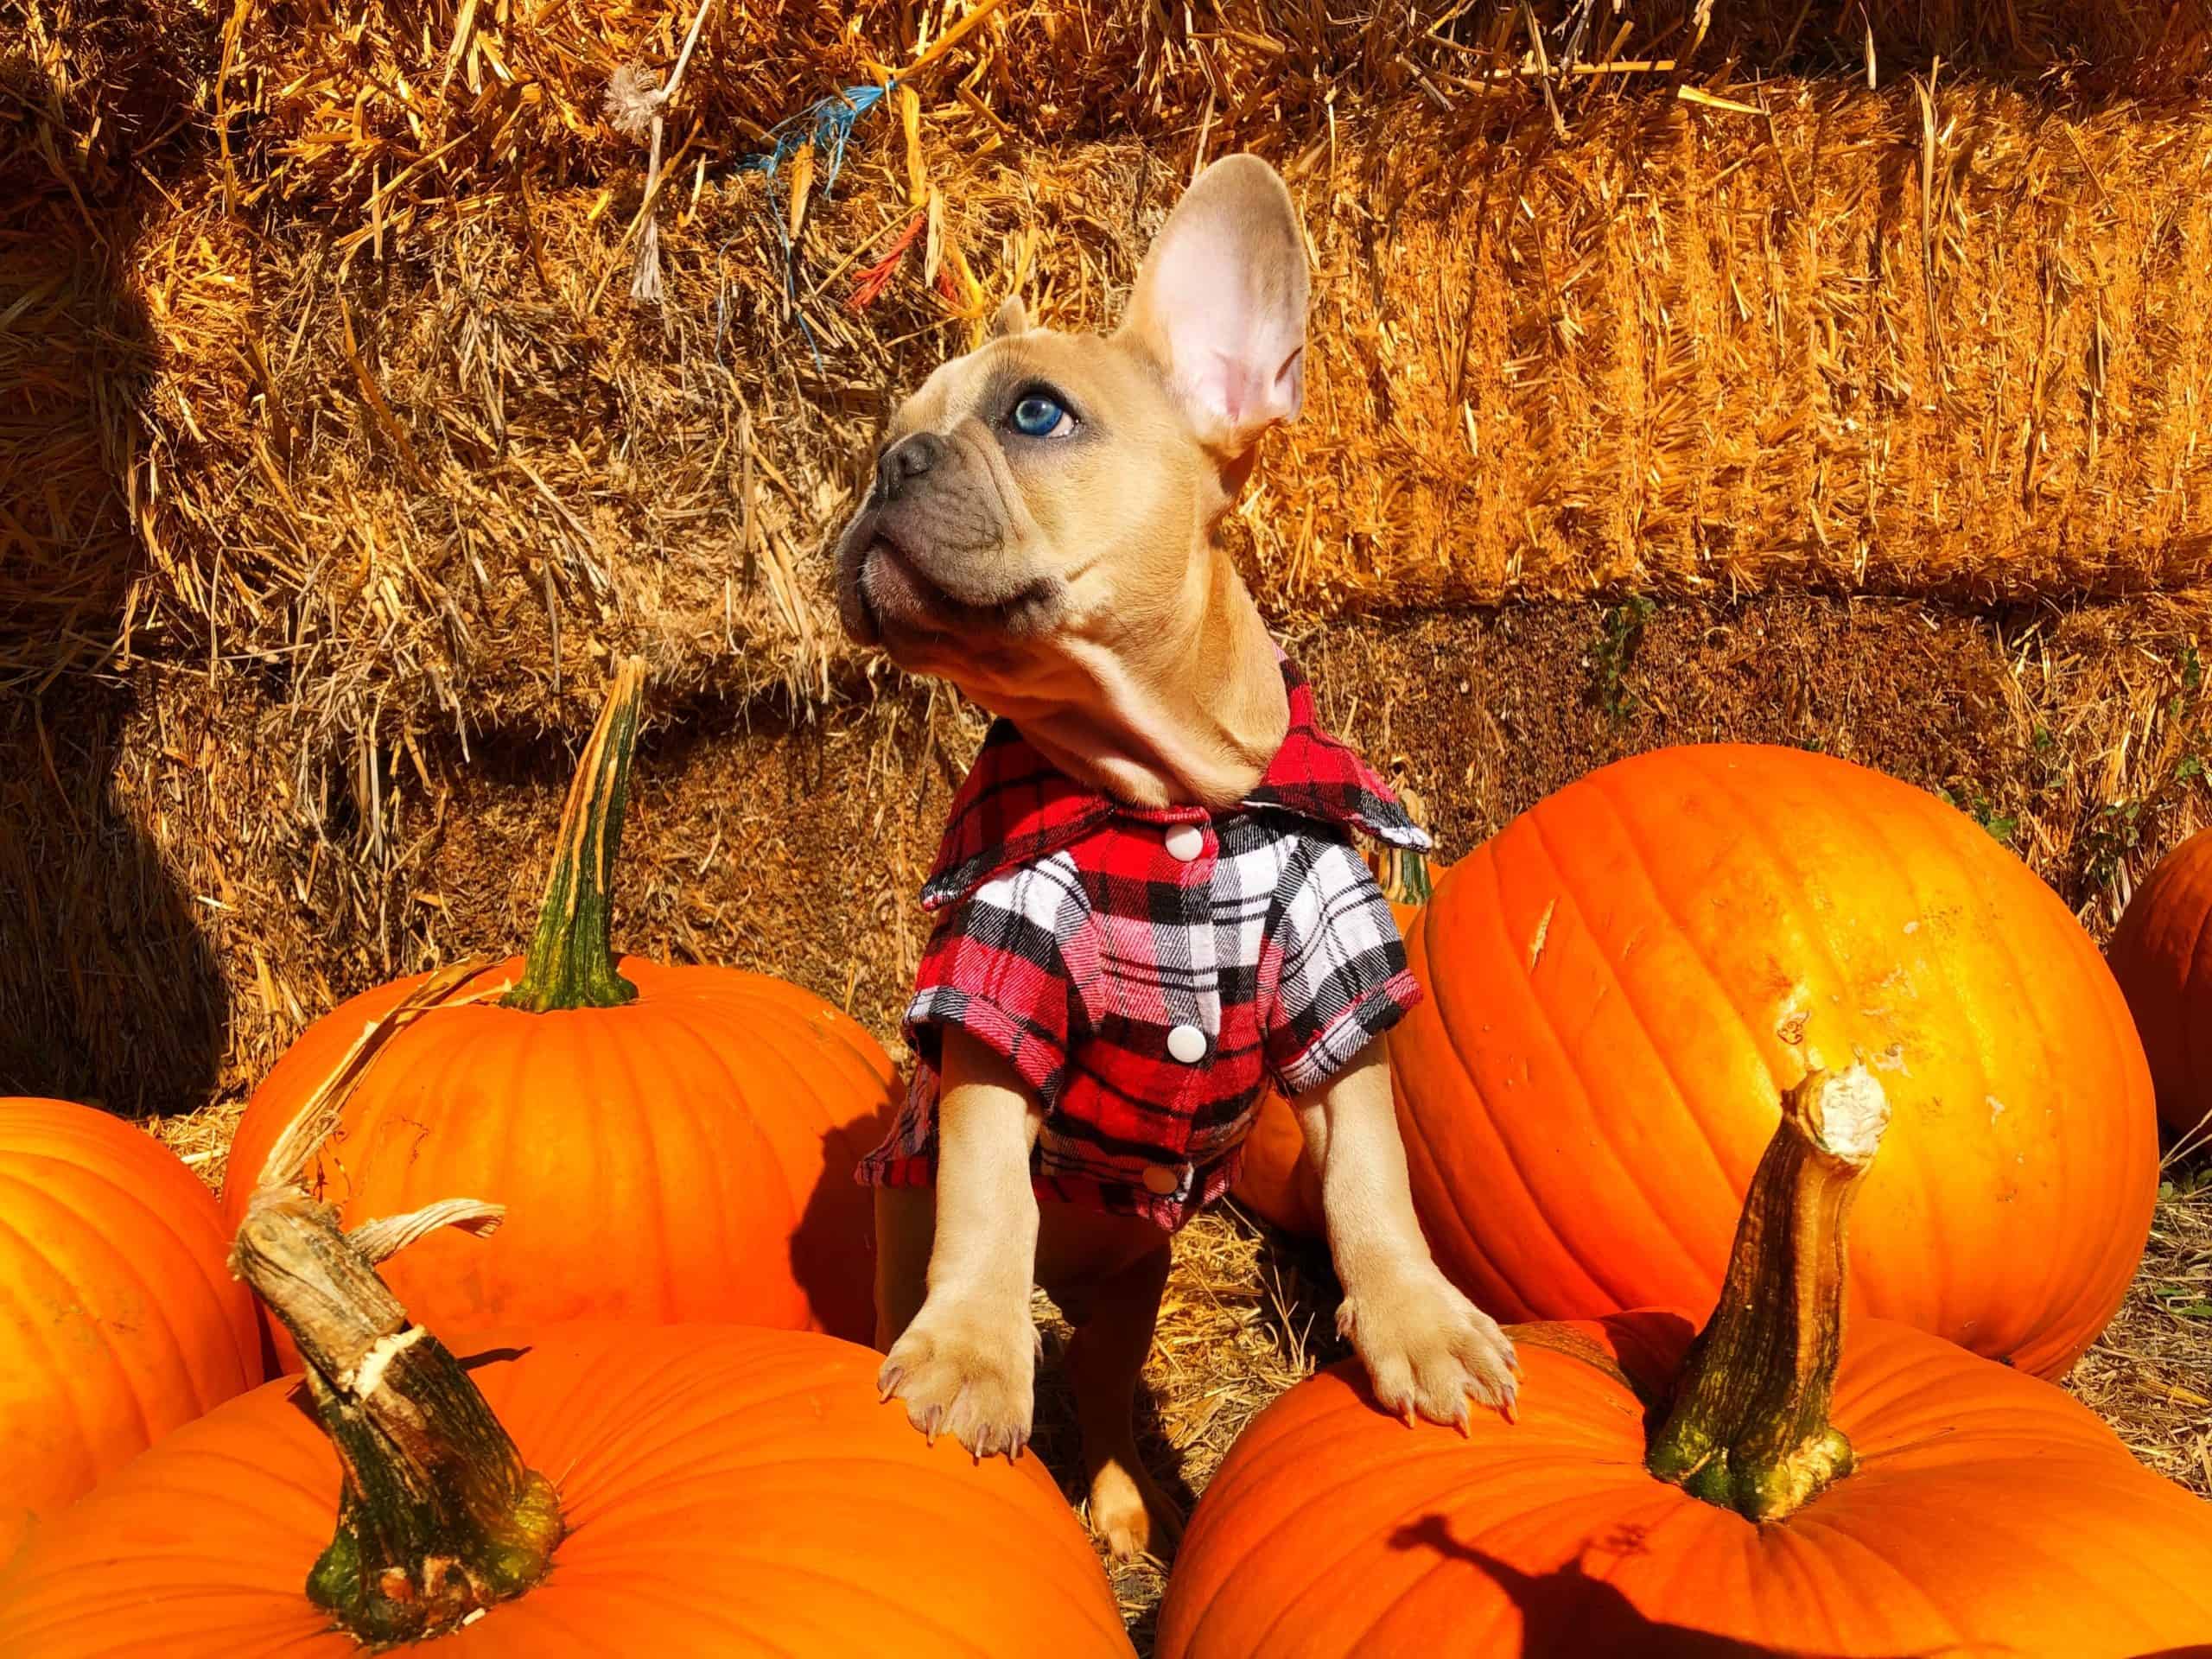 Can dogs have pumpkin? Dog posing with pumpkins!